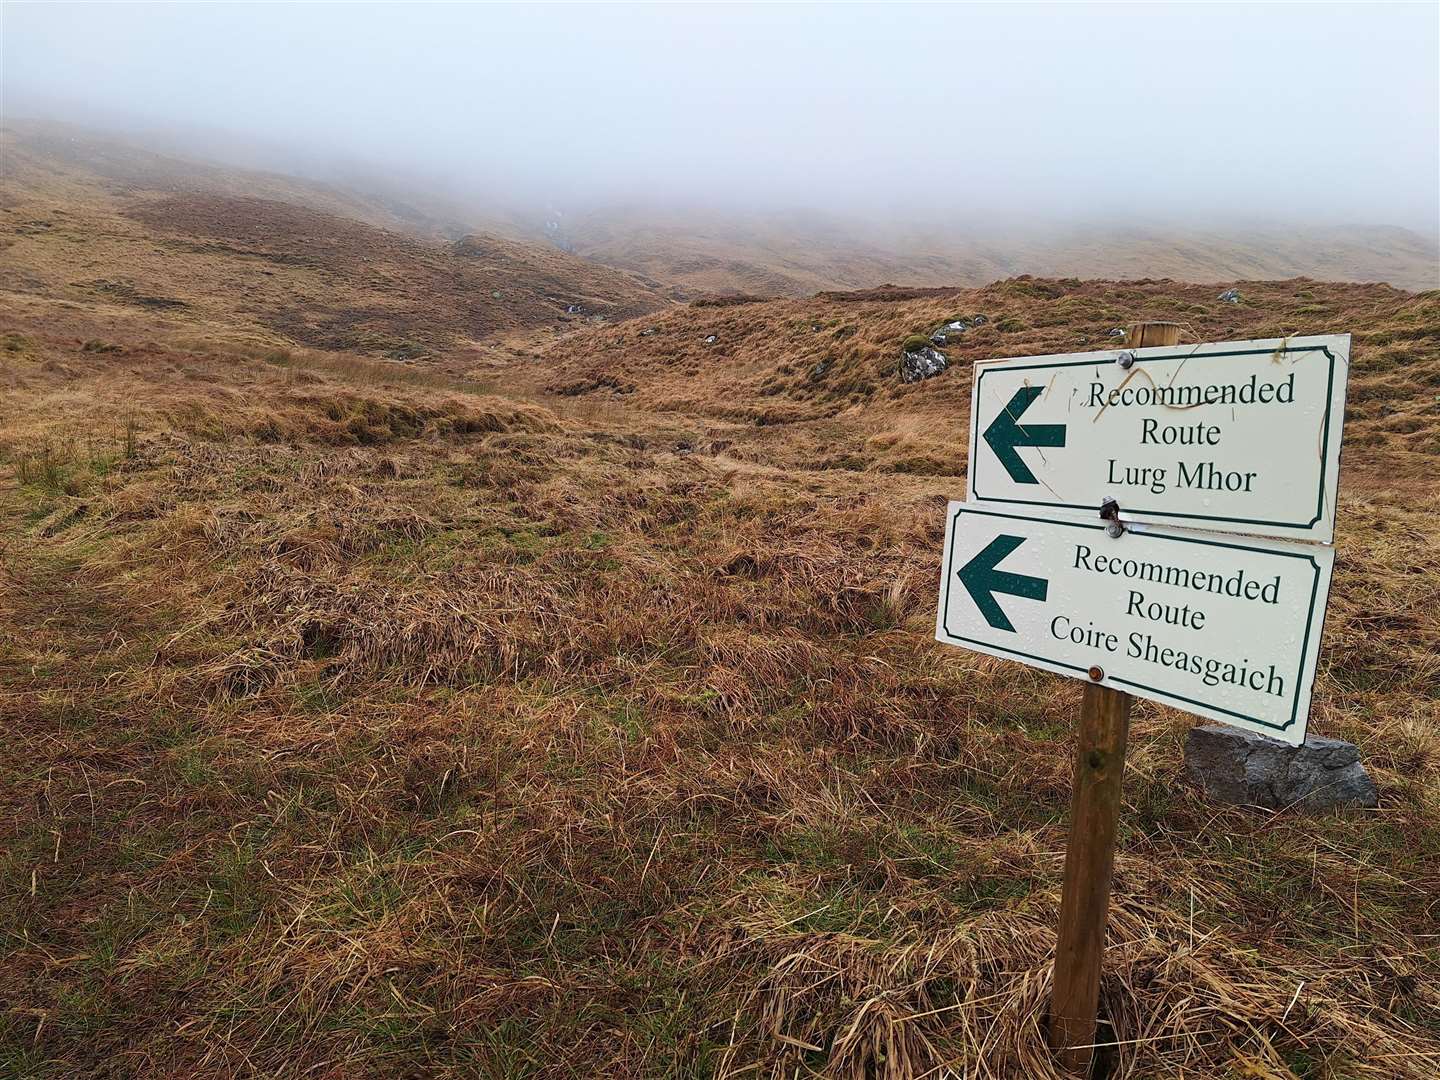 The estate has signposted its preferred route for walkers to take up the Munros.